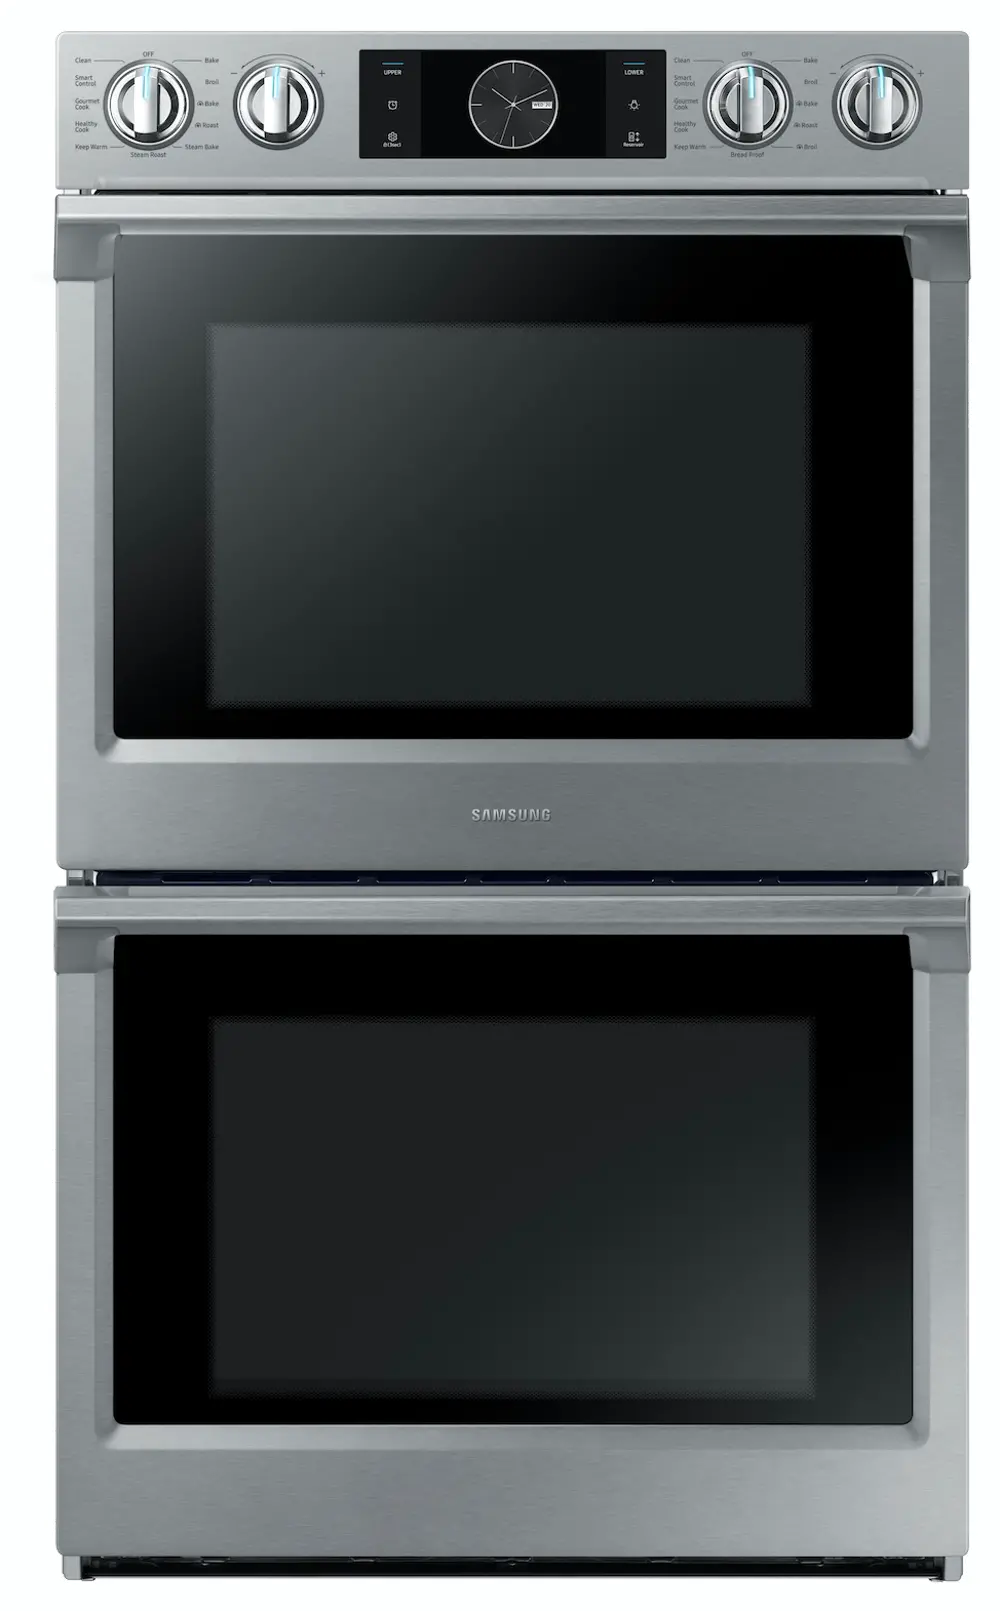 NV51K7770DS Samsung 10.2 cu ft Double Wall Oven - Stainless Steel 30 Inch-1